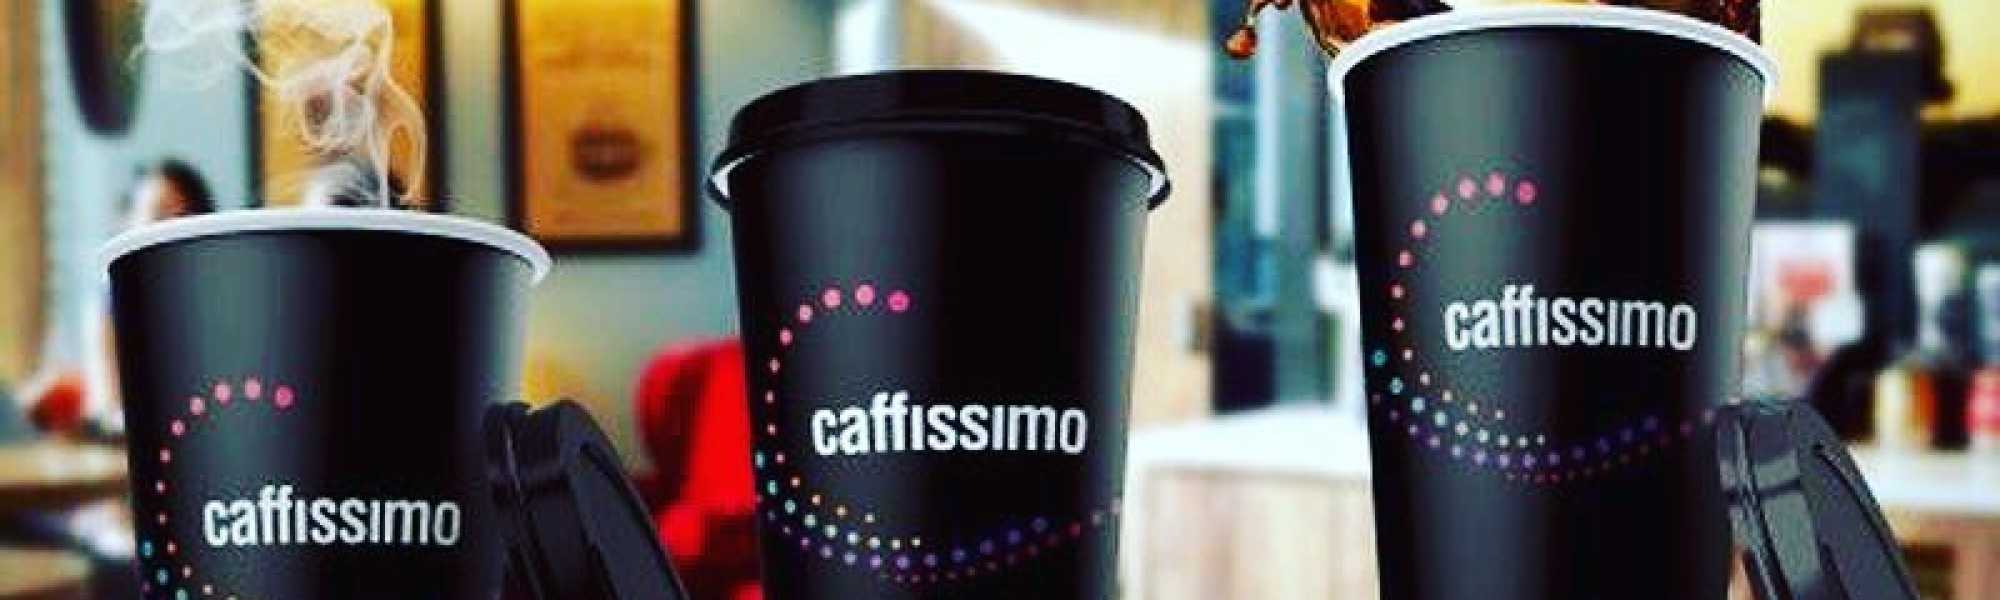 Caffissimo Mount Lawley